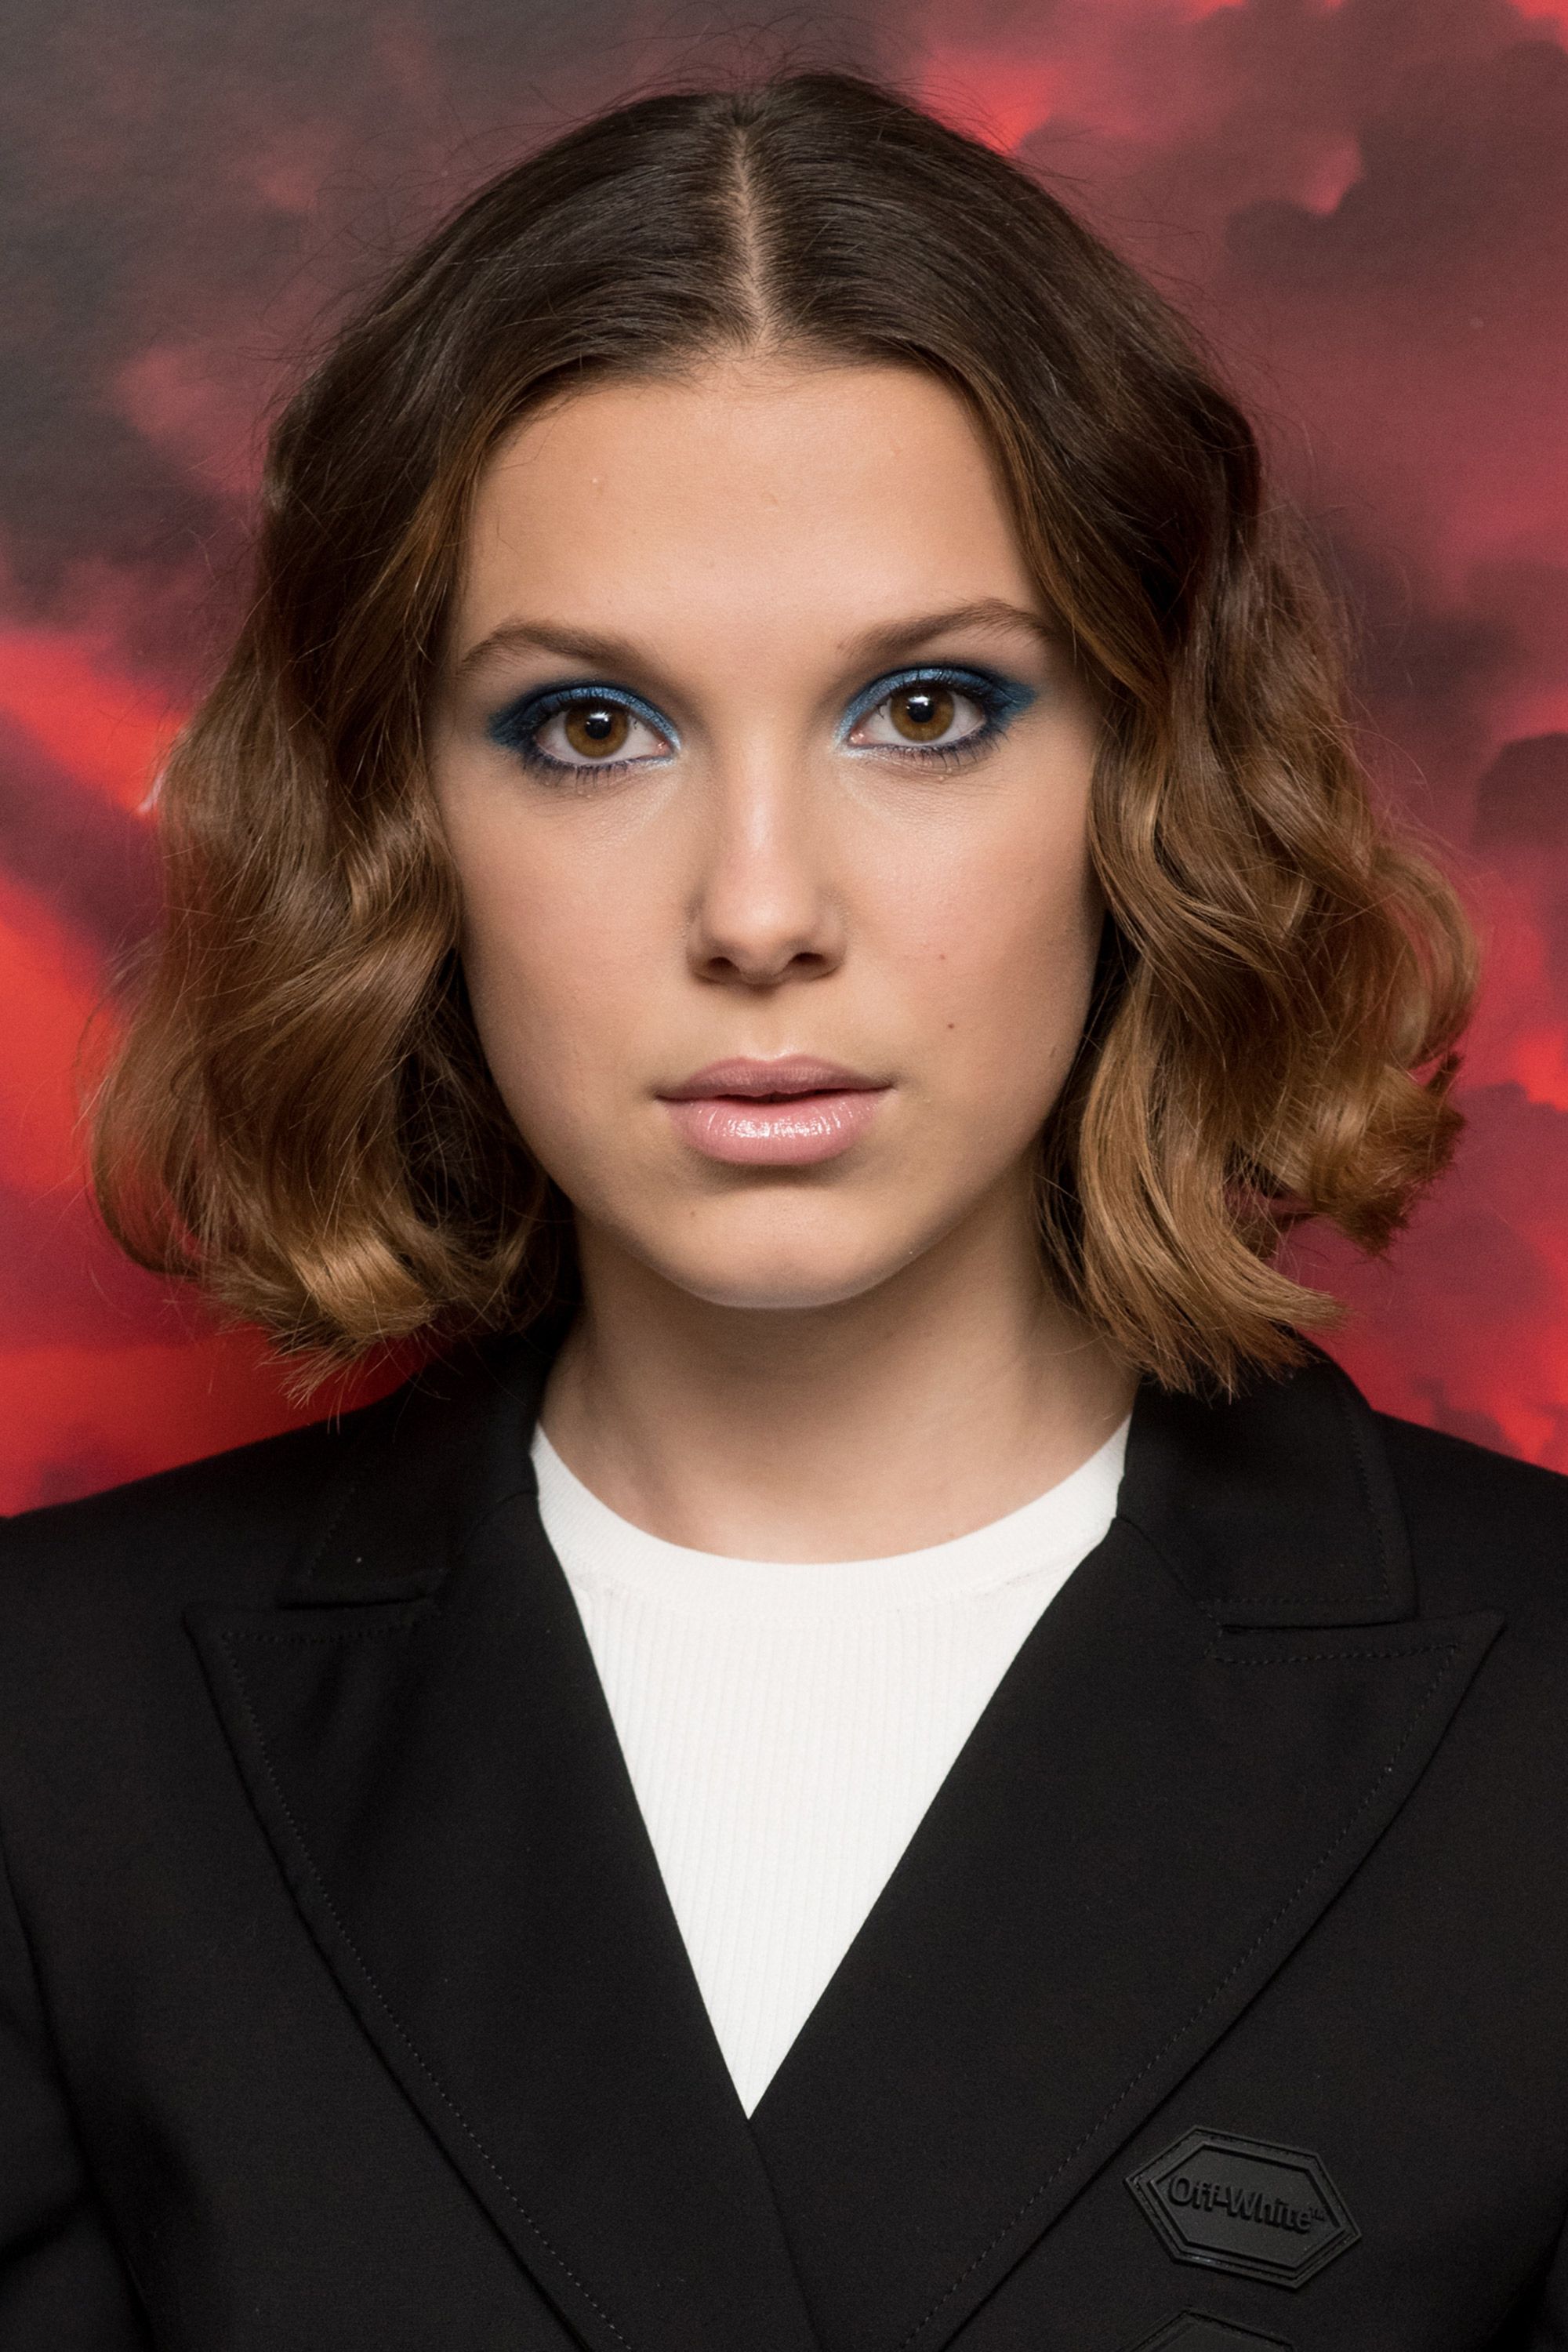 Millie Bobby Brown's launched makeup and skincare line Florence by